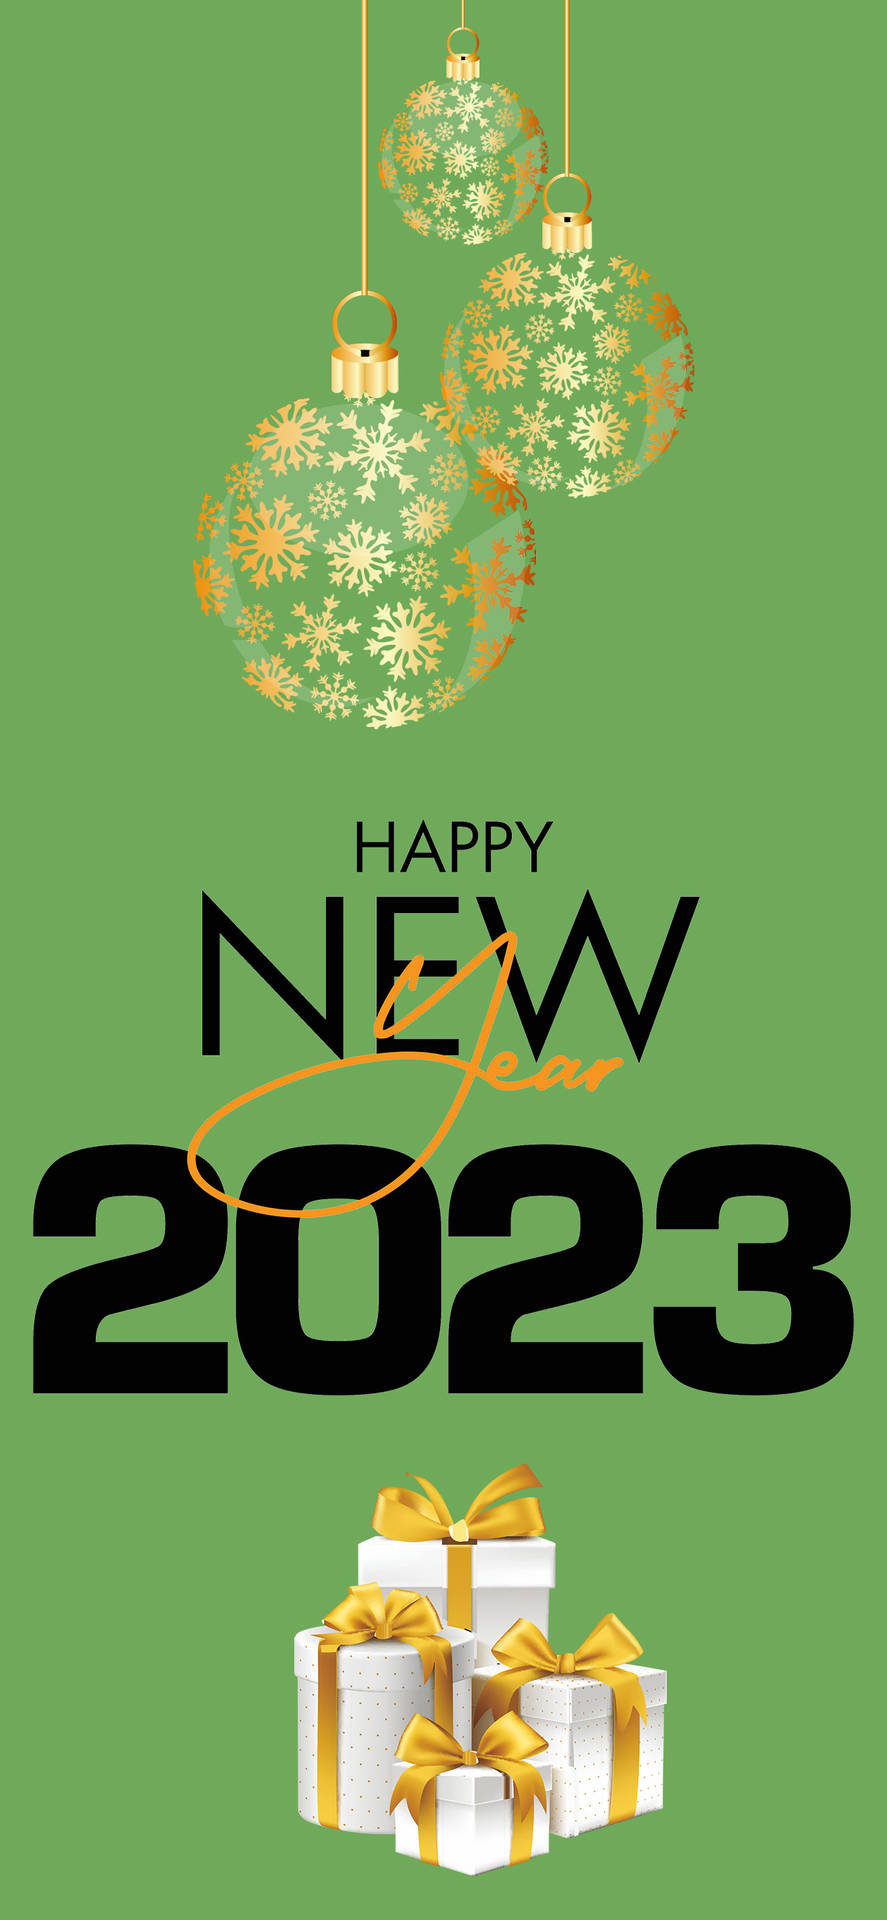 Happy New Year 2023 Gold Ornaments Wallpaper